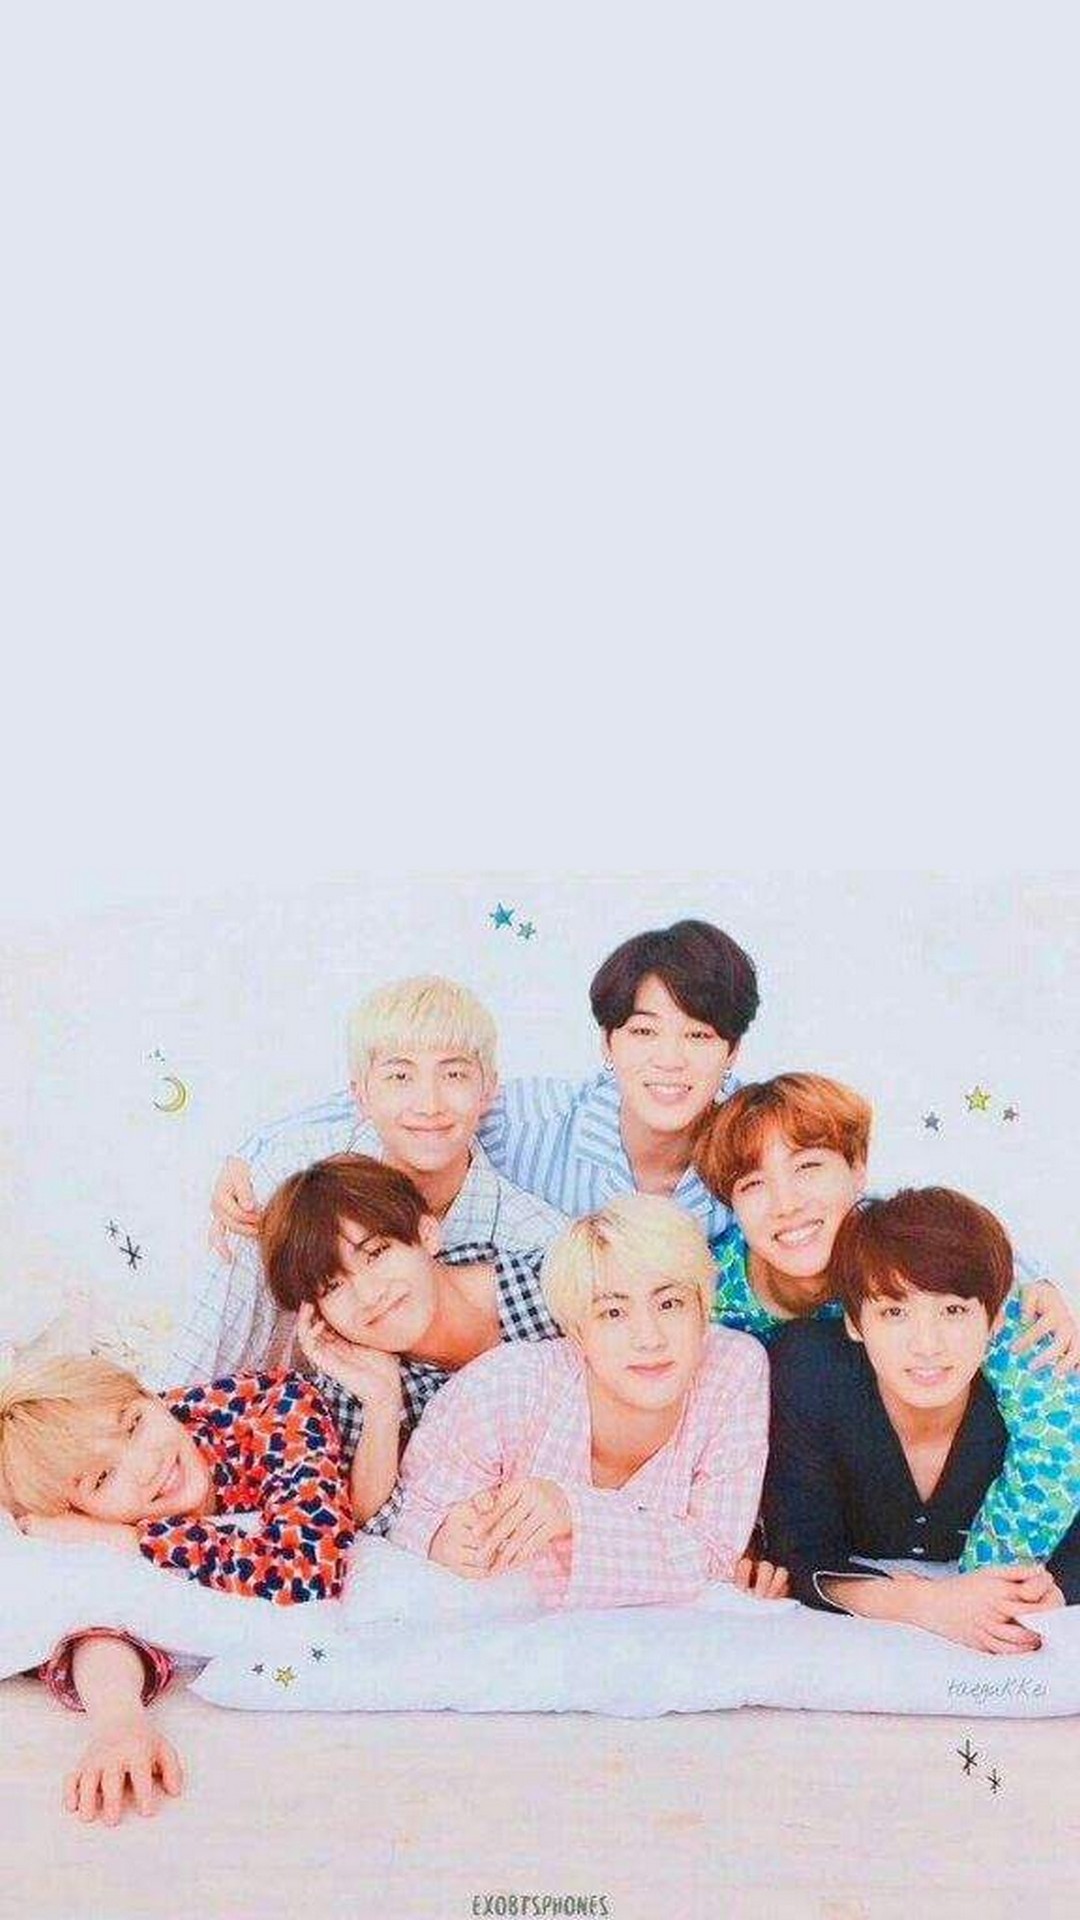 BTS iPhone X Wallpaper With high-resolution 1080X1920 pixel. You can use this wallpaper for your iPhone 5, 6, 7, 8, X, XS, XR backgrounds, Mobile Screensaver, or iPad Lock Screen